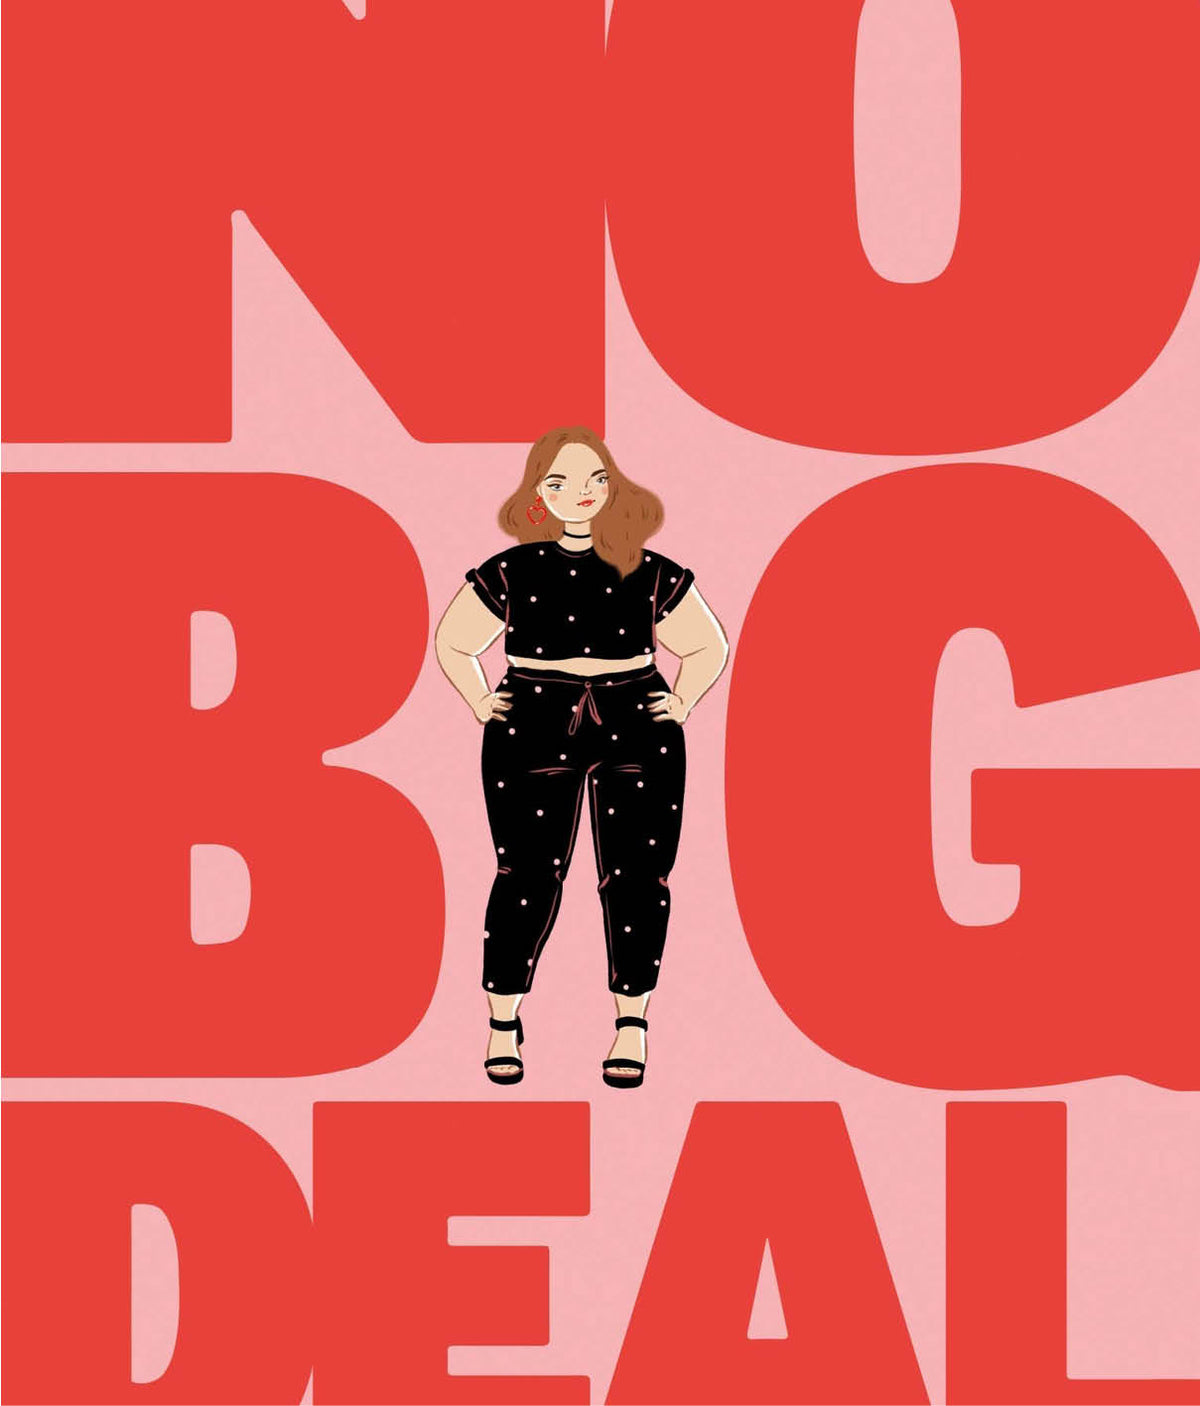 No Big Deal by Bethany Rutter